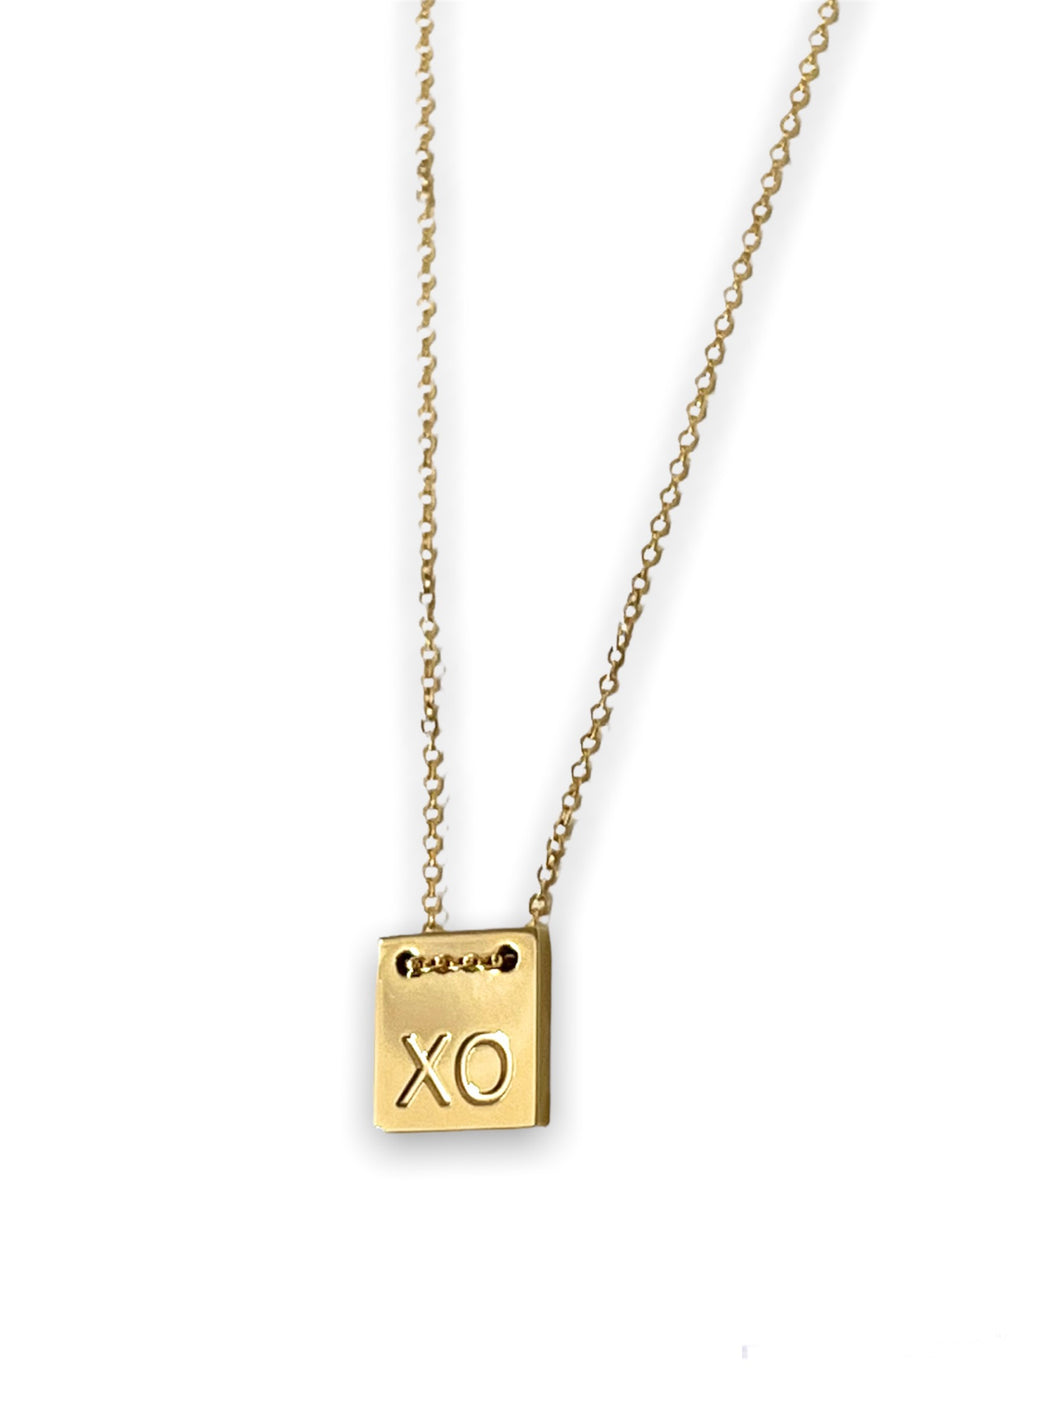 XO (Hugs and Kisses) Tablet Necklace Gold – MAS Designs